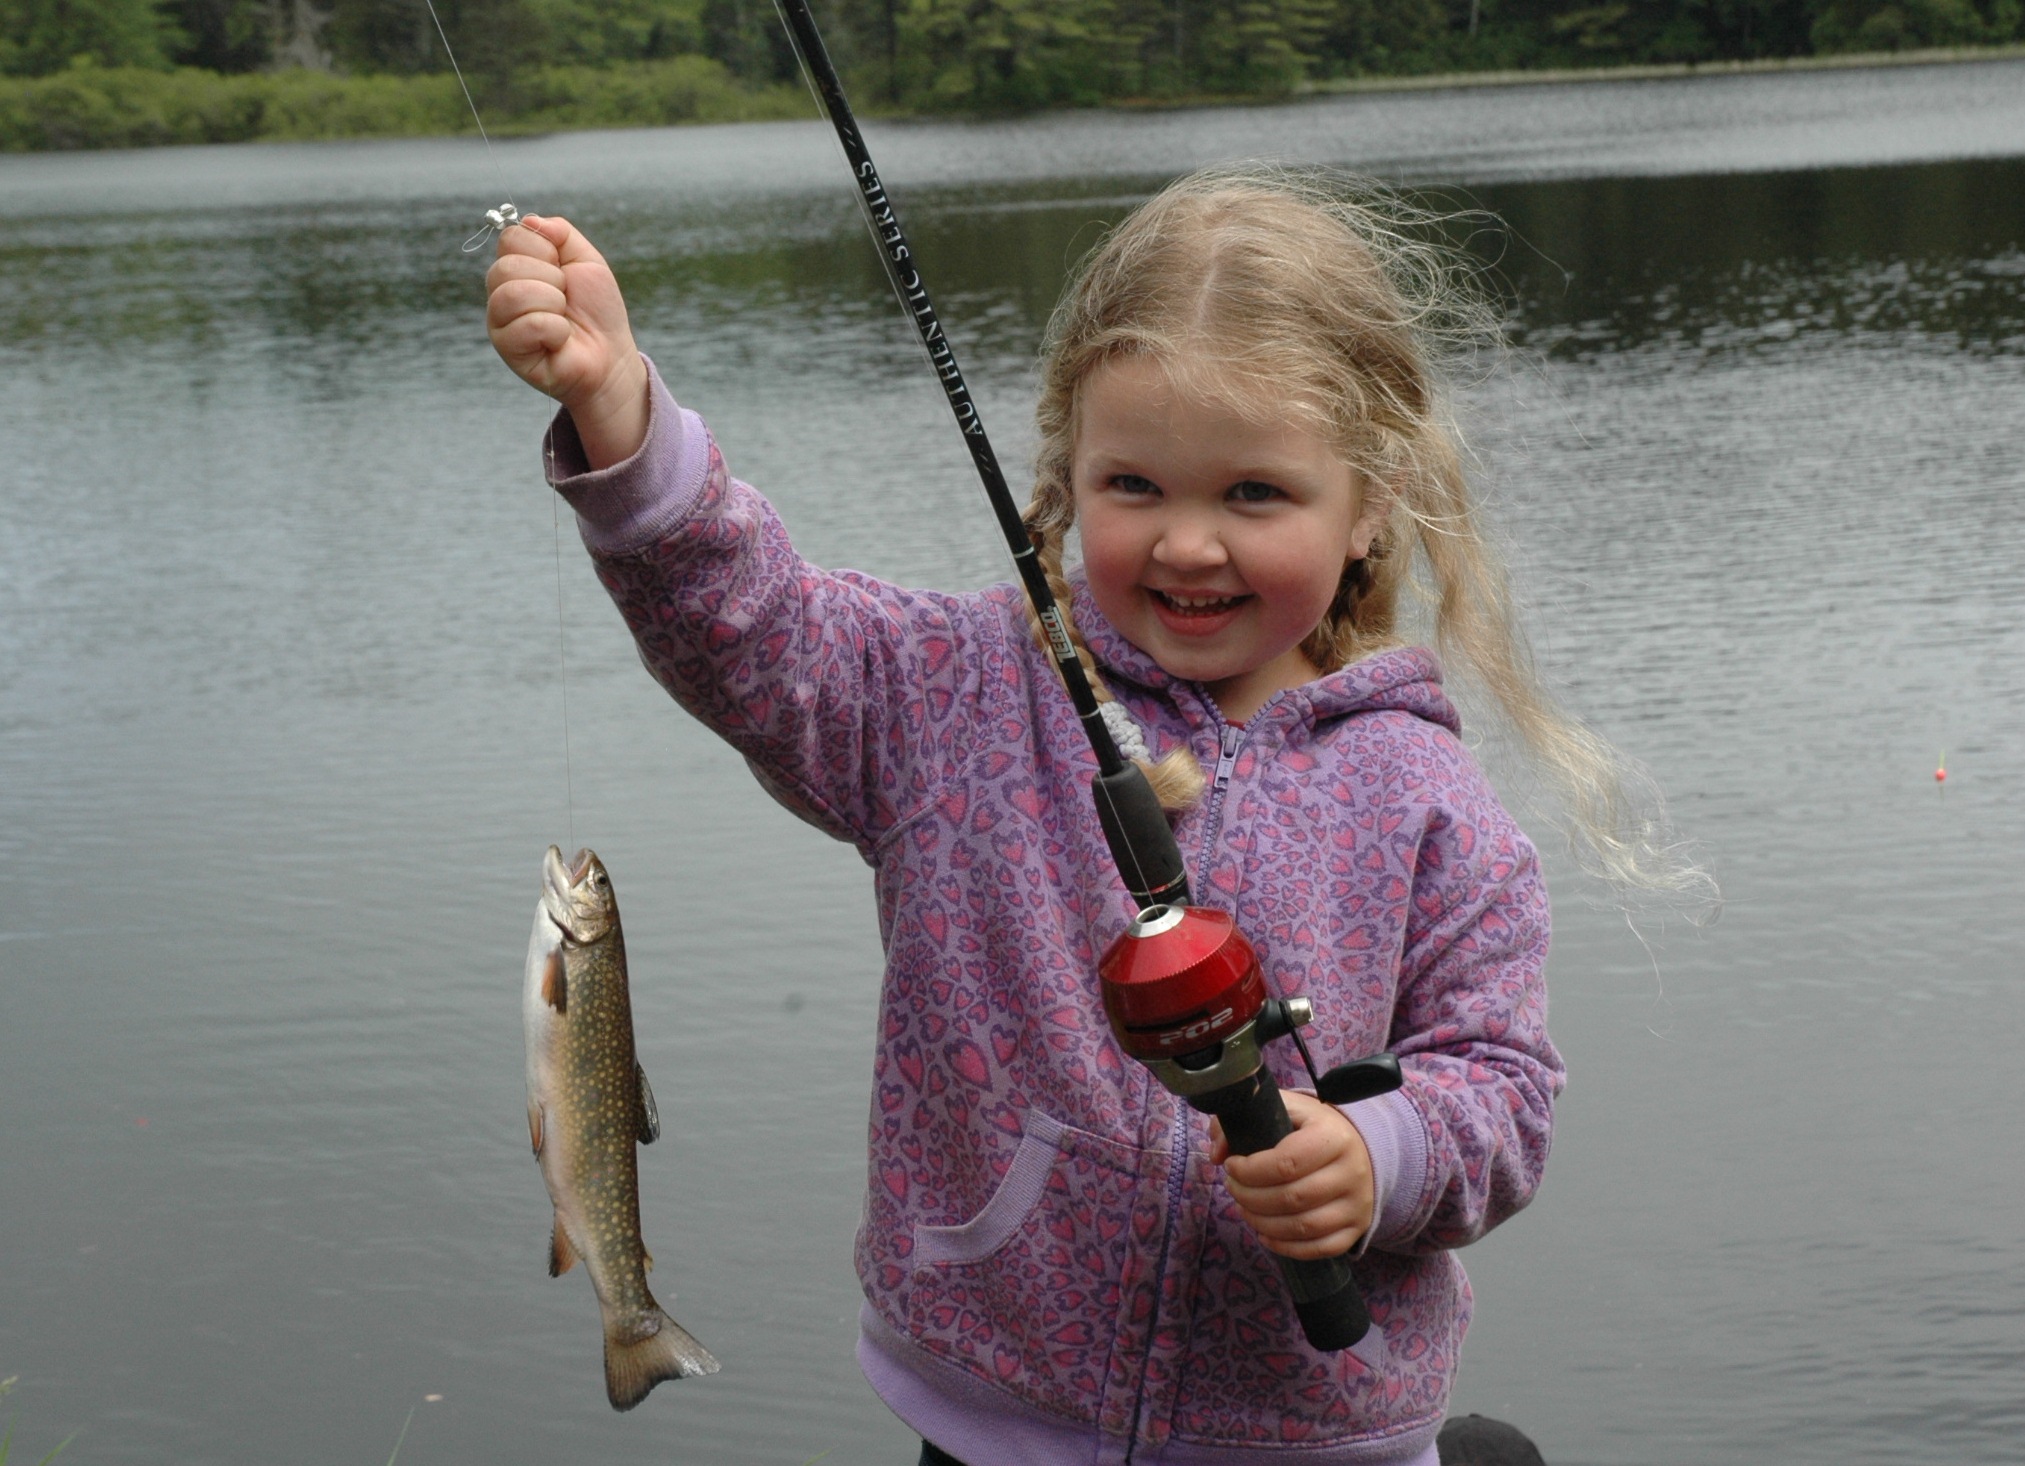 The 24th Annual Hapgood Pond Fishing Derby – TU Southwestern Vermont